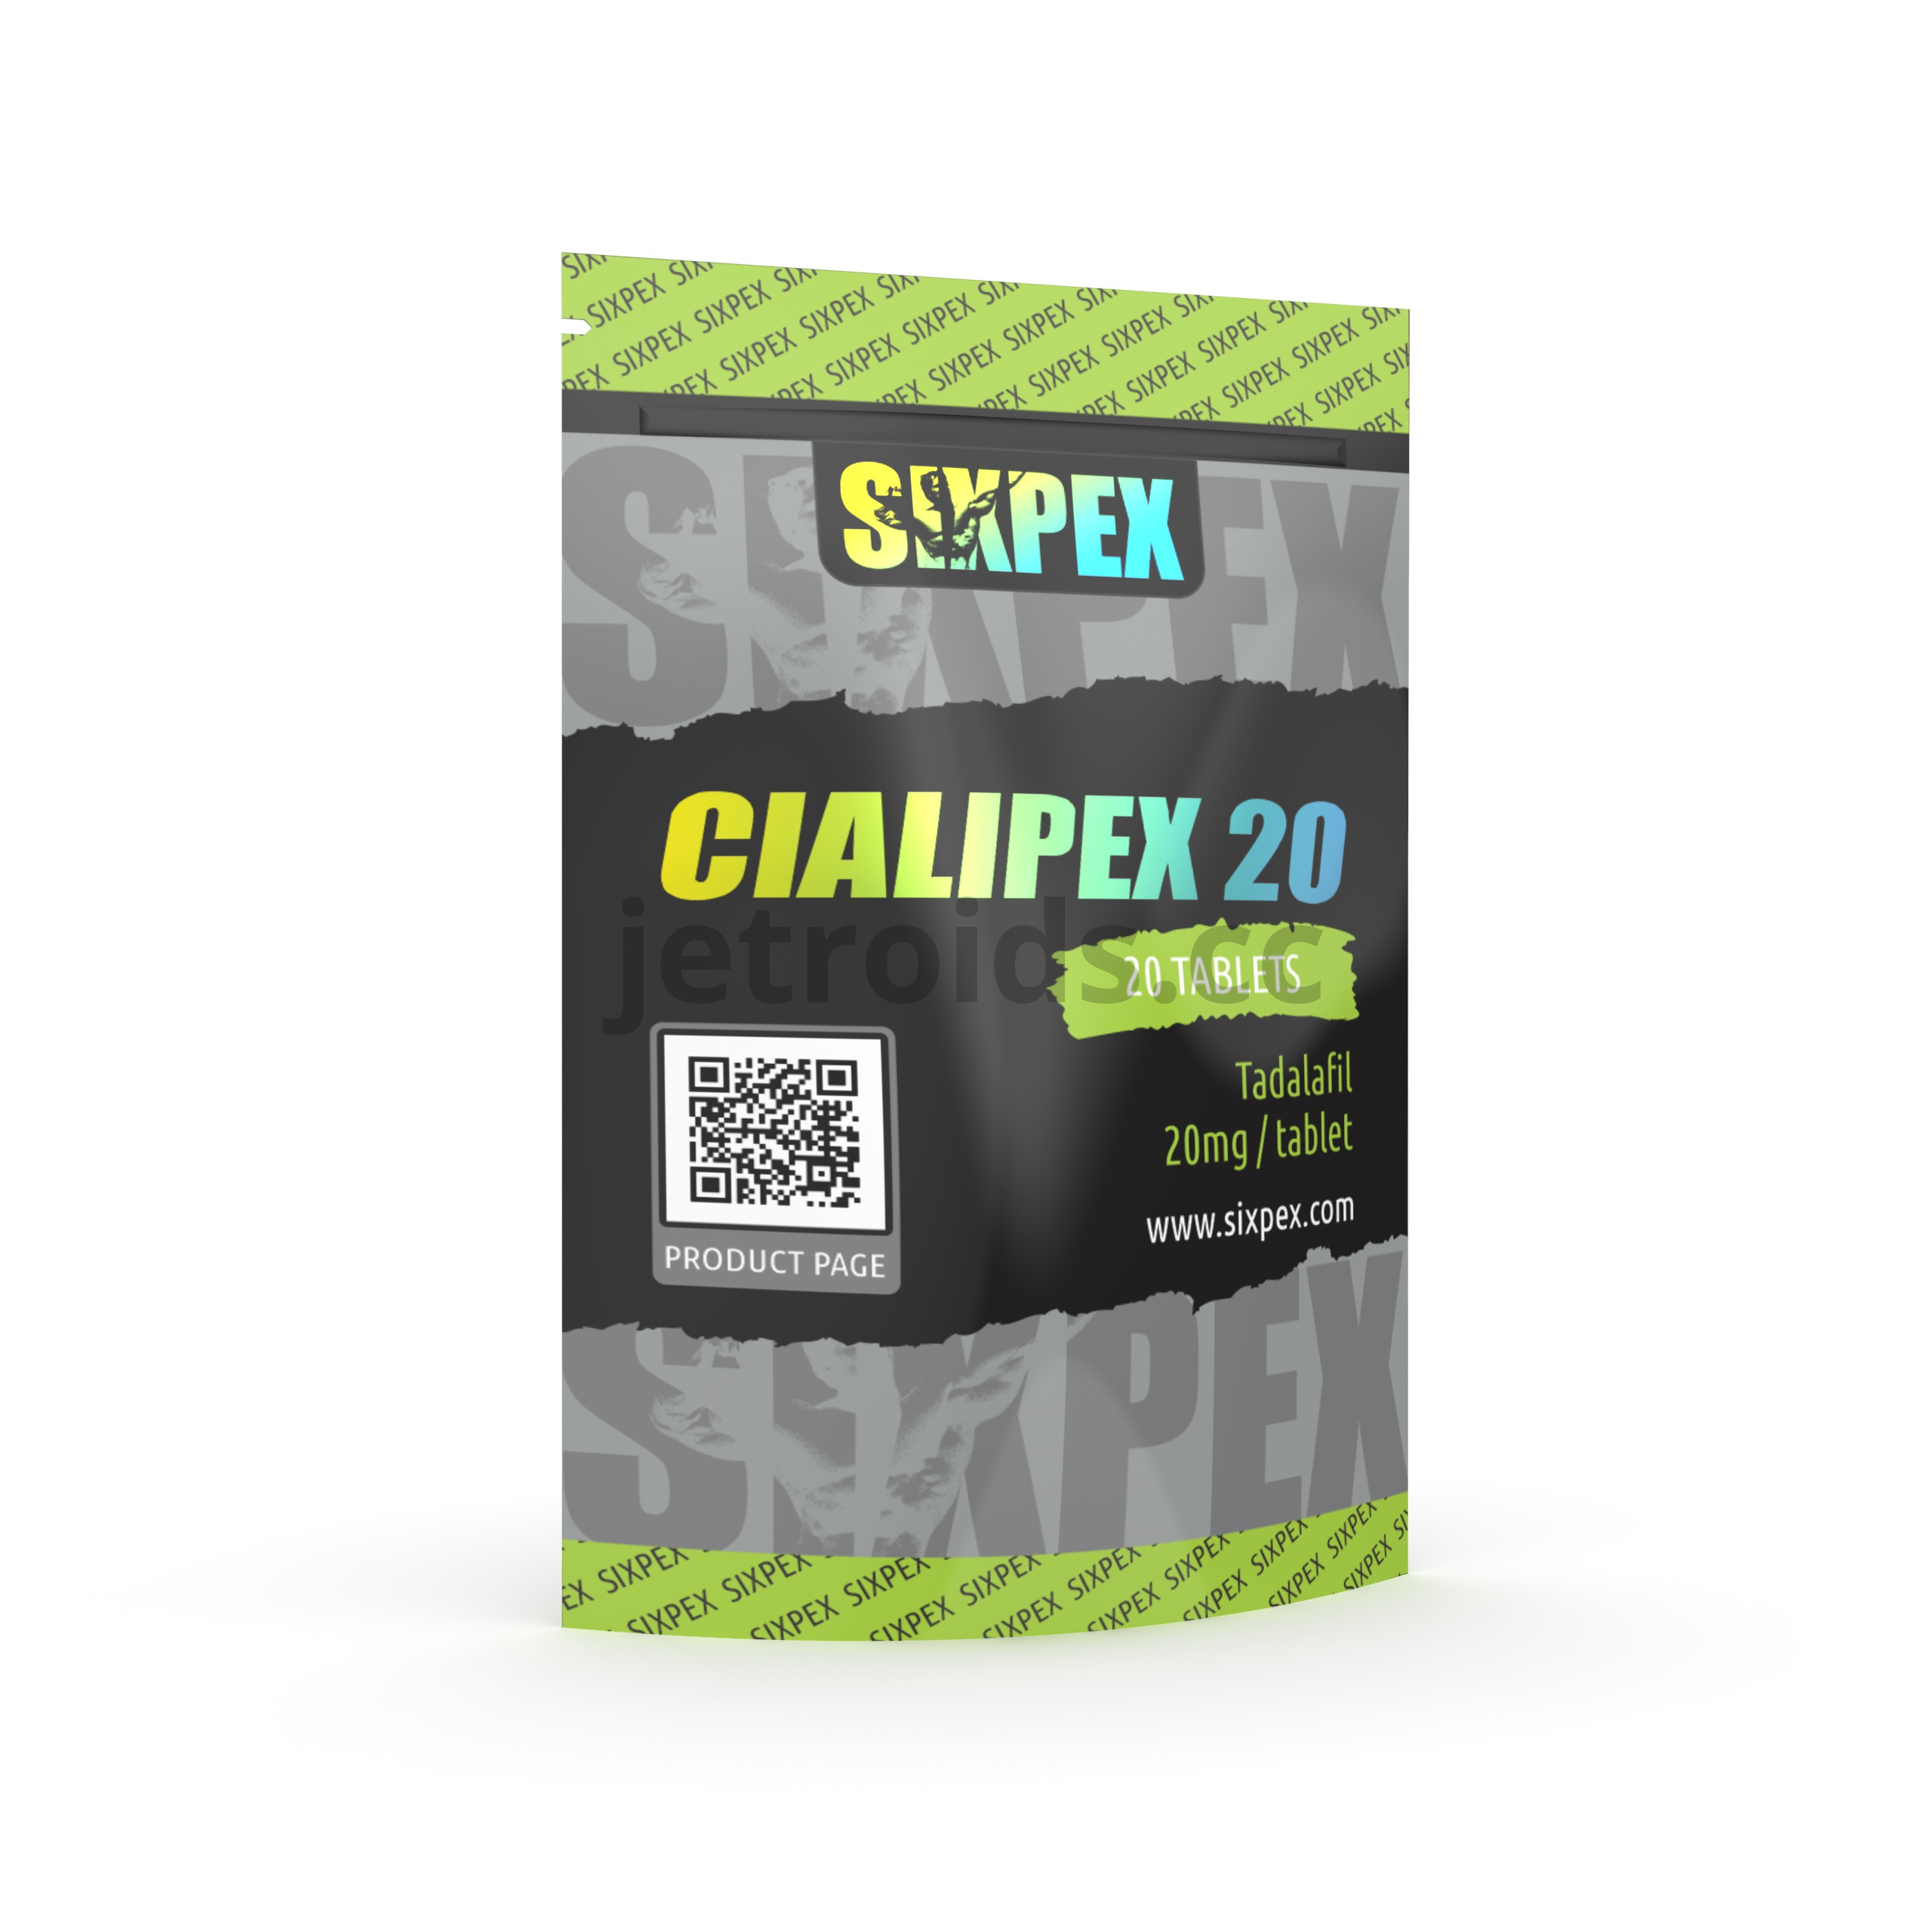 Sixpex Cialipex 20 Product Info